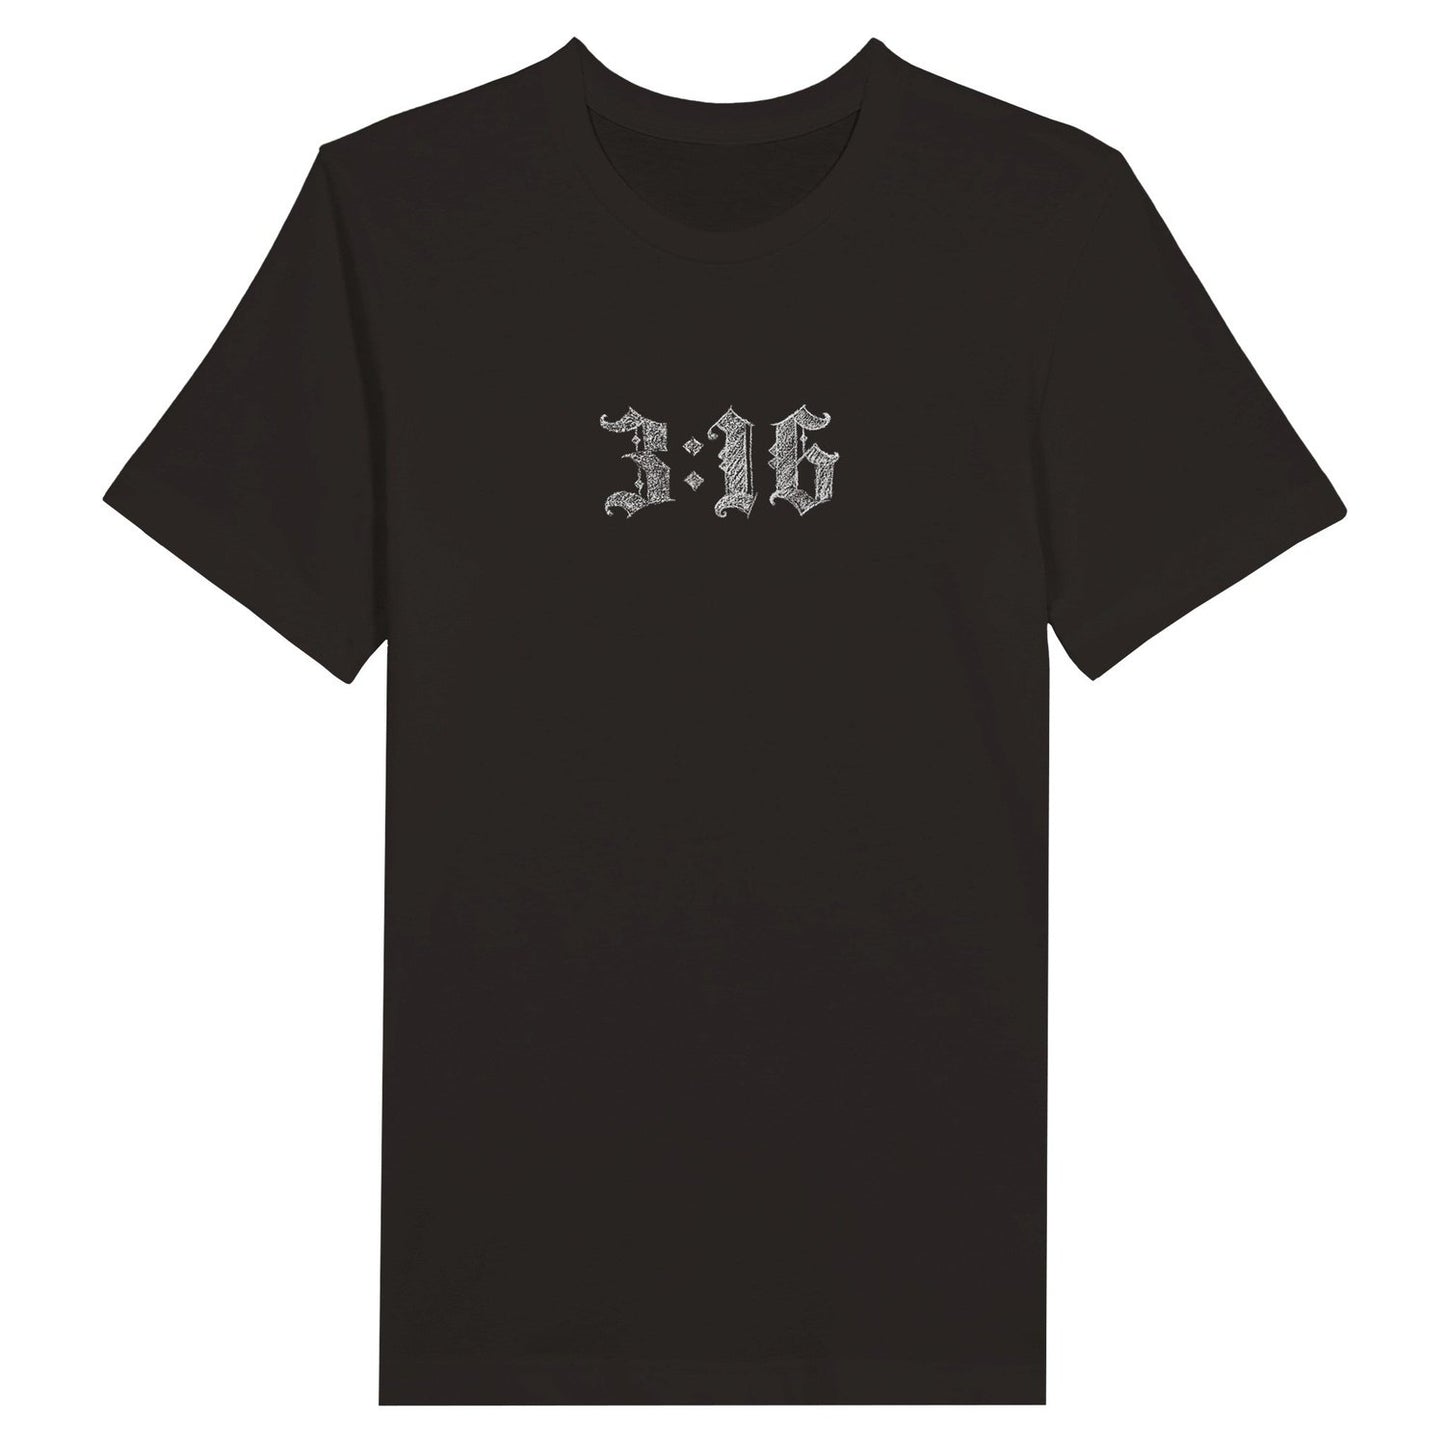 An image of 3:16 Chalk | Premium Unisex Christian T-shirt available at 3rd Day Christian Clothing UK